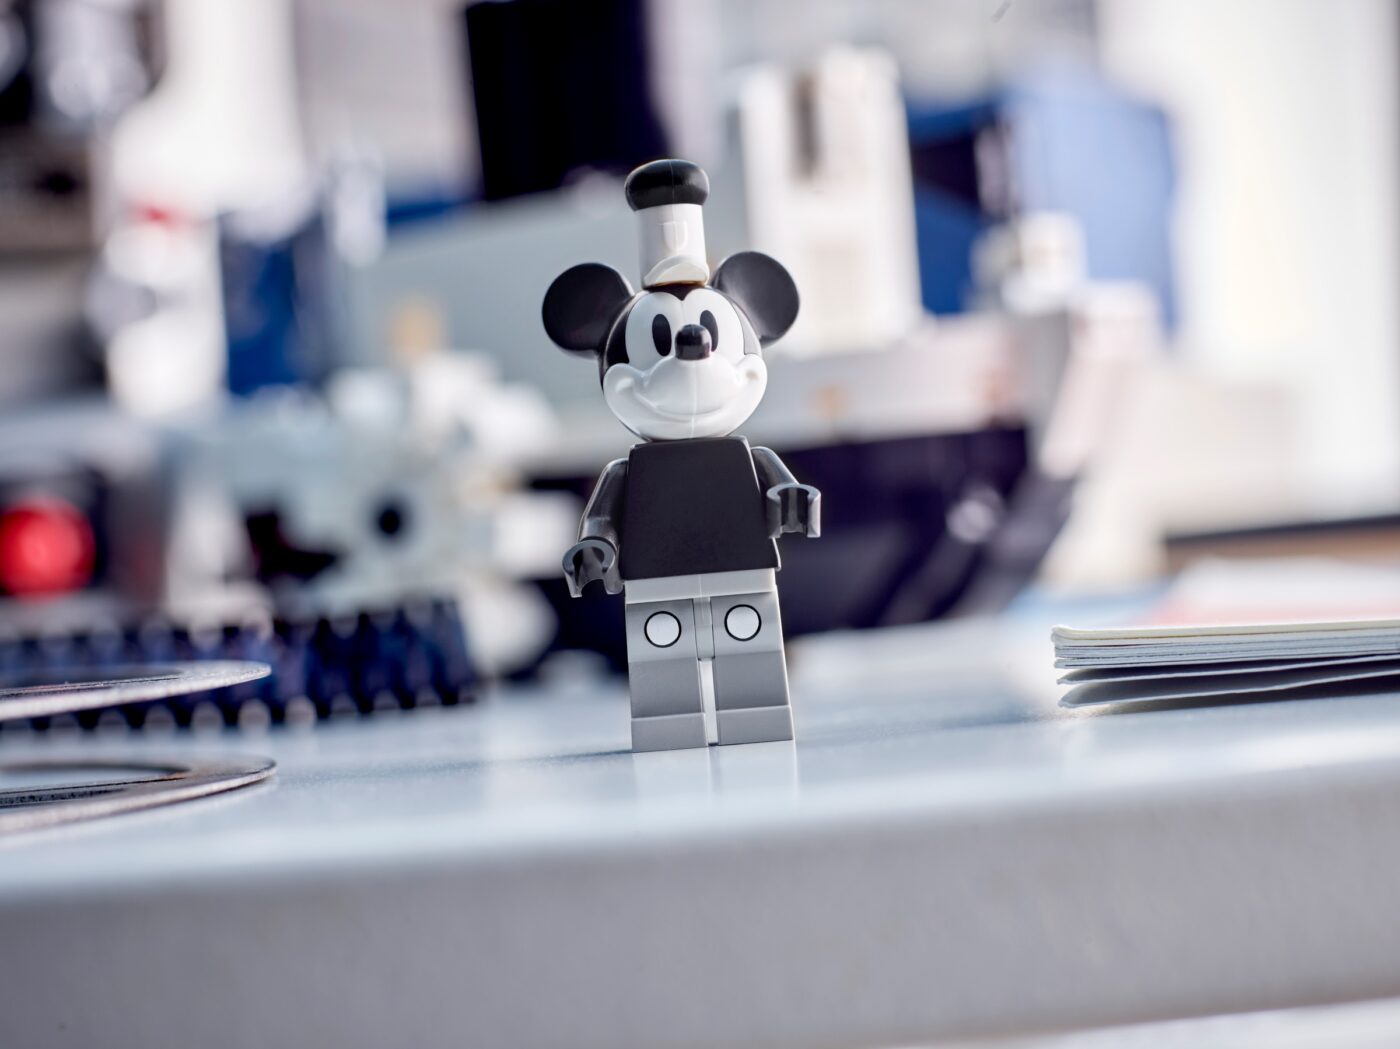 LEGO 40659 Mini Steamboat Willie GWP revealed to have mechanical functions!13